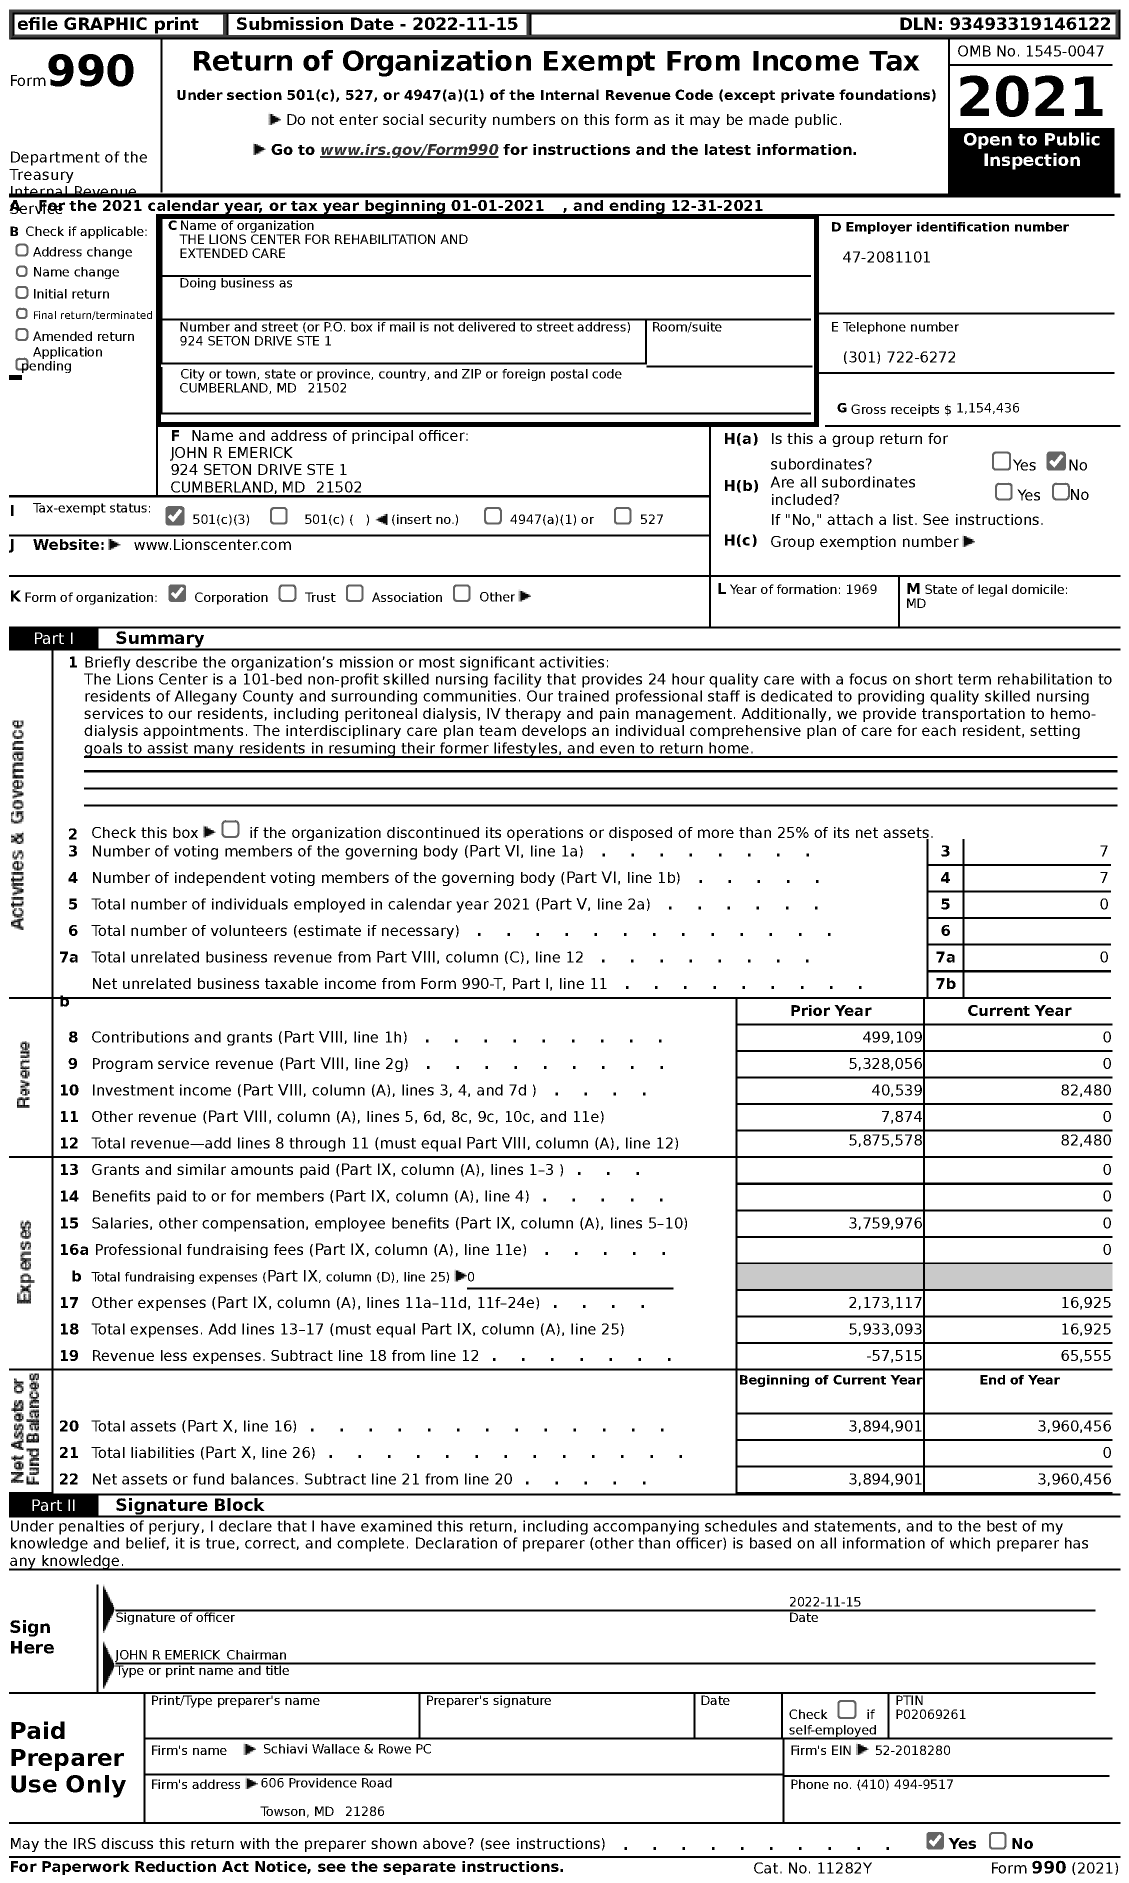 Image of first page of 2021 Form 990 for The Lions Center for Rehabilitation and Extended Care